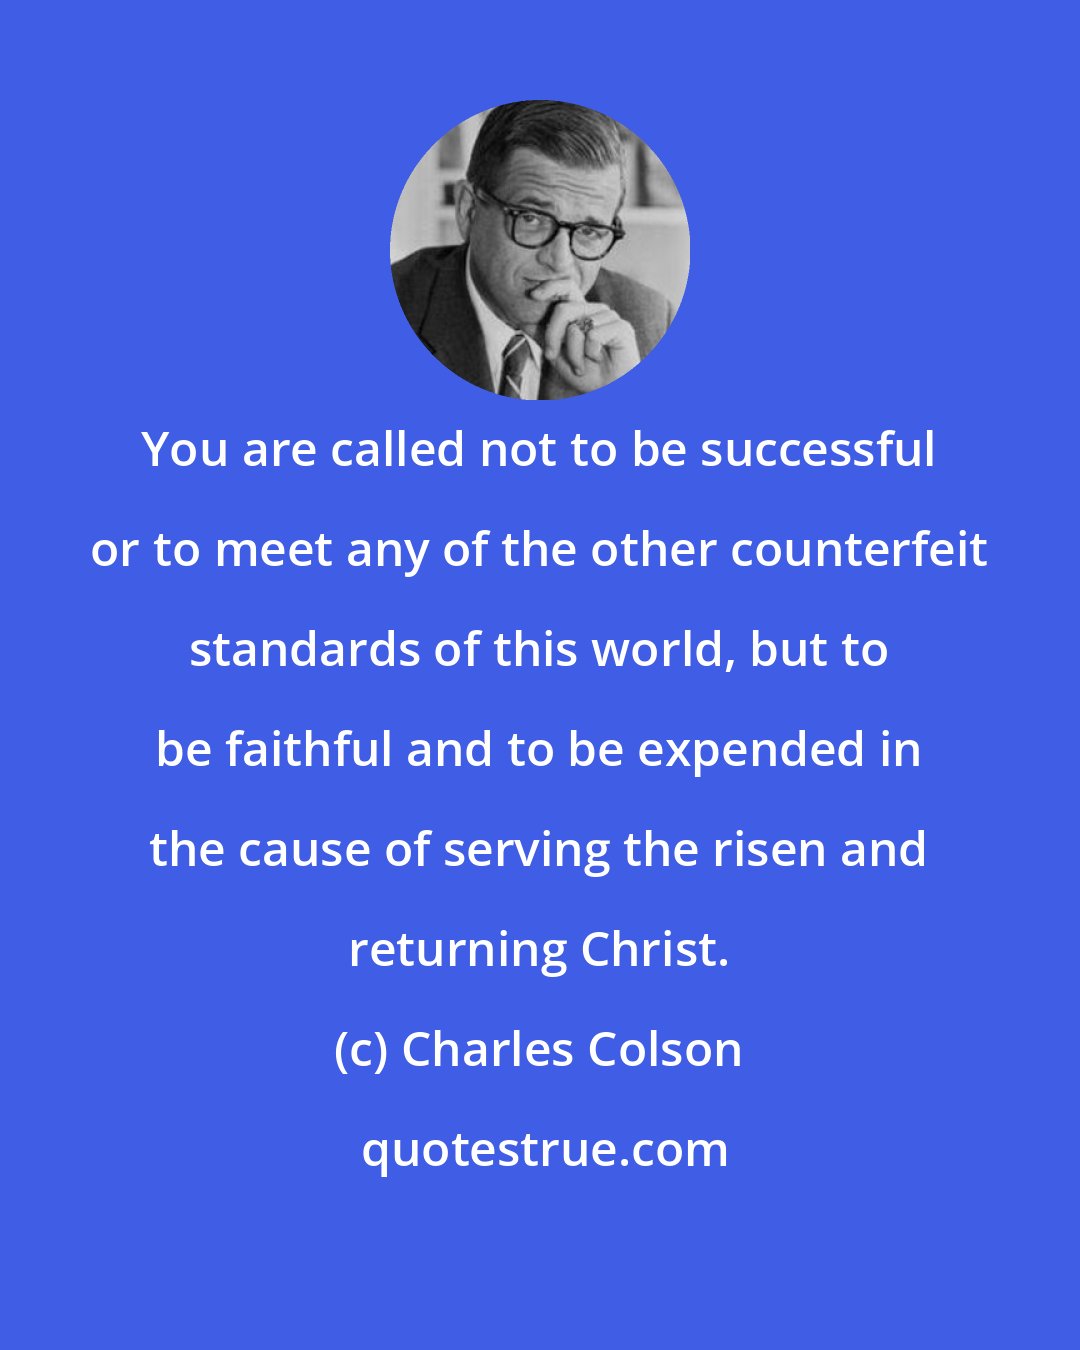 Charles Colson: You are called not to be successful or to meet any of the other counterfeit standards of this world, but to be faithful and to be expended in the cause of serving the risen and returning Christ.